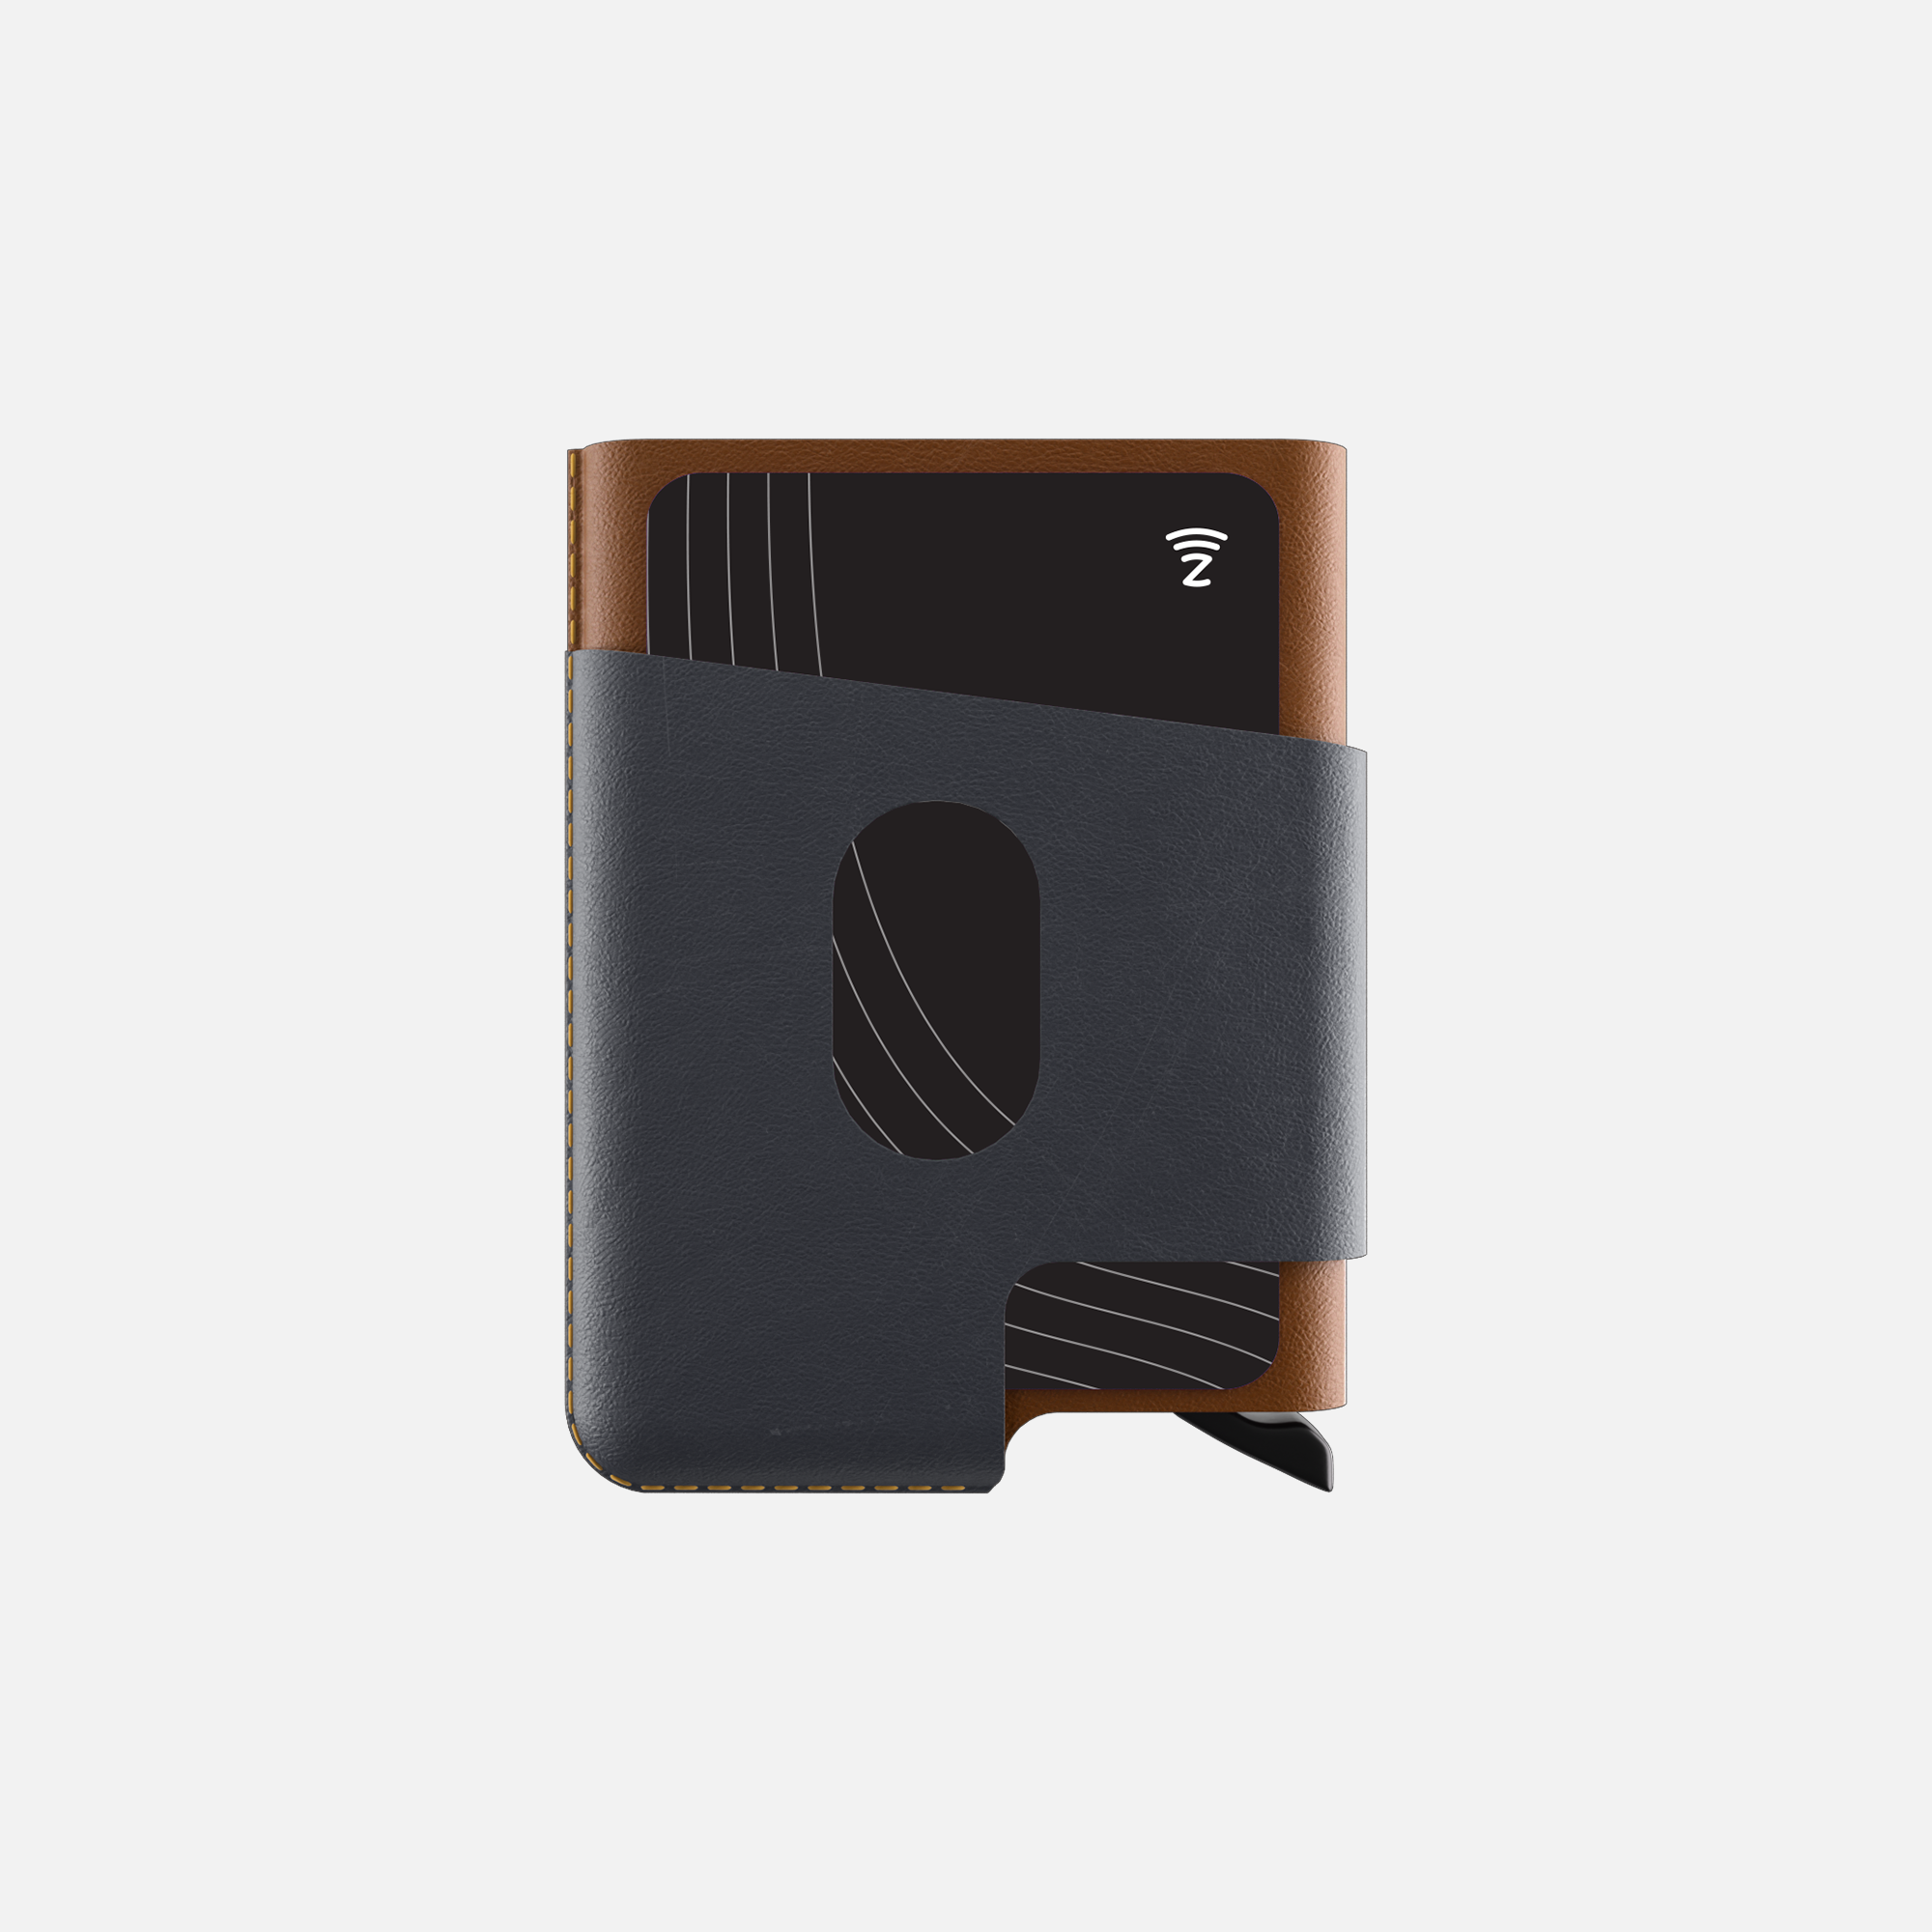 CUT-OUT Cardholder - RFID Block Featured - Handmade Natural Genuine Leather - Havan-Blue Gray